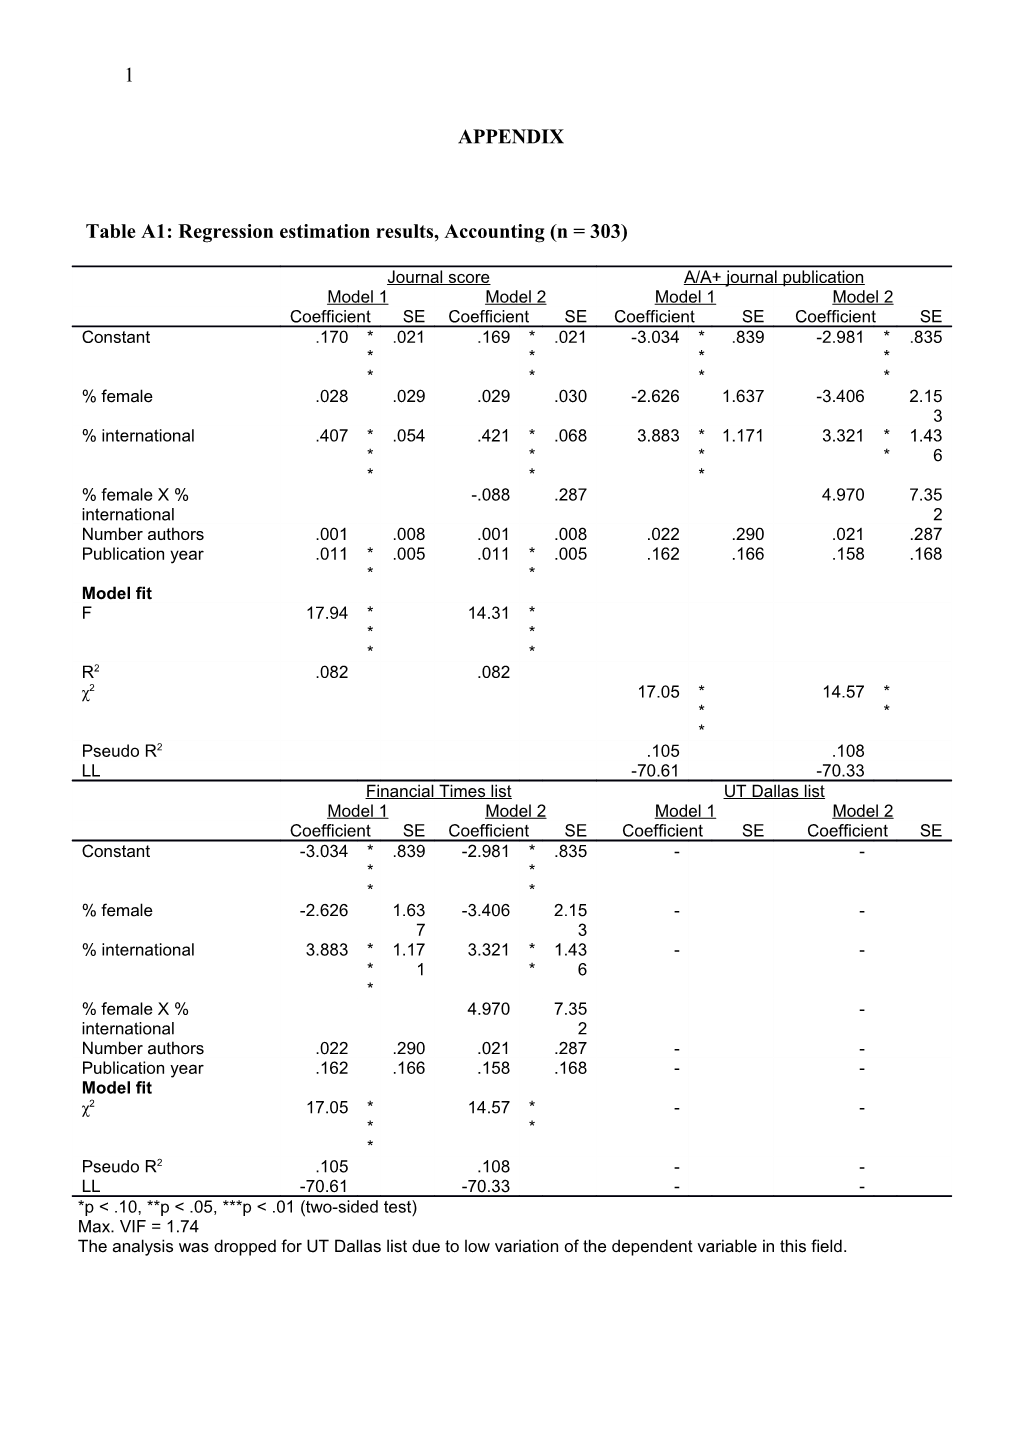 Table A1: Regression Estimation Results, Accounting (N = 303)